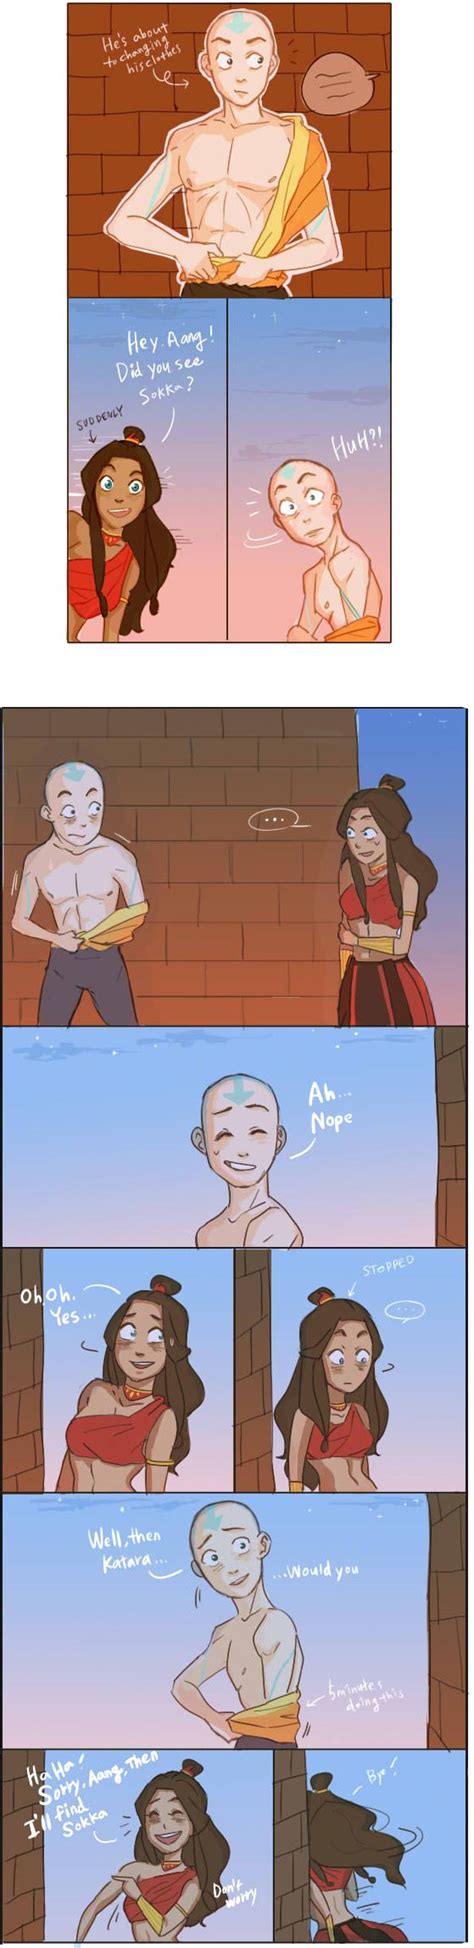 Kataang Comicmaybe He 1 By Psychej93 On Deviantart Avatar The Last Airbender Funny The